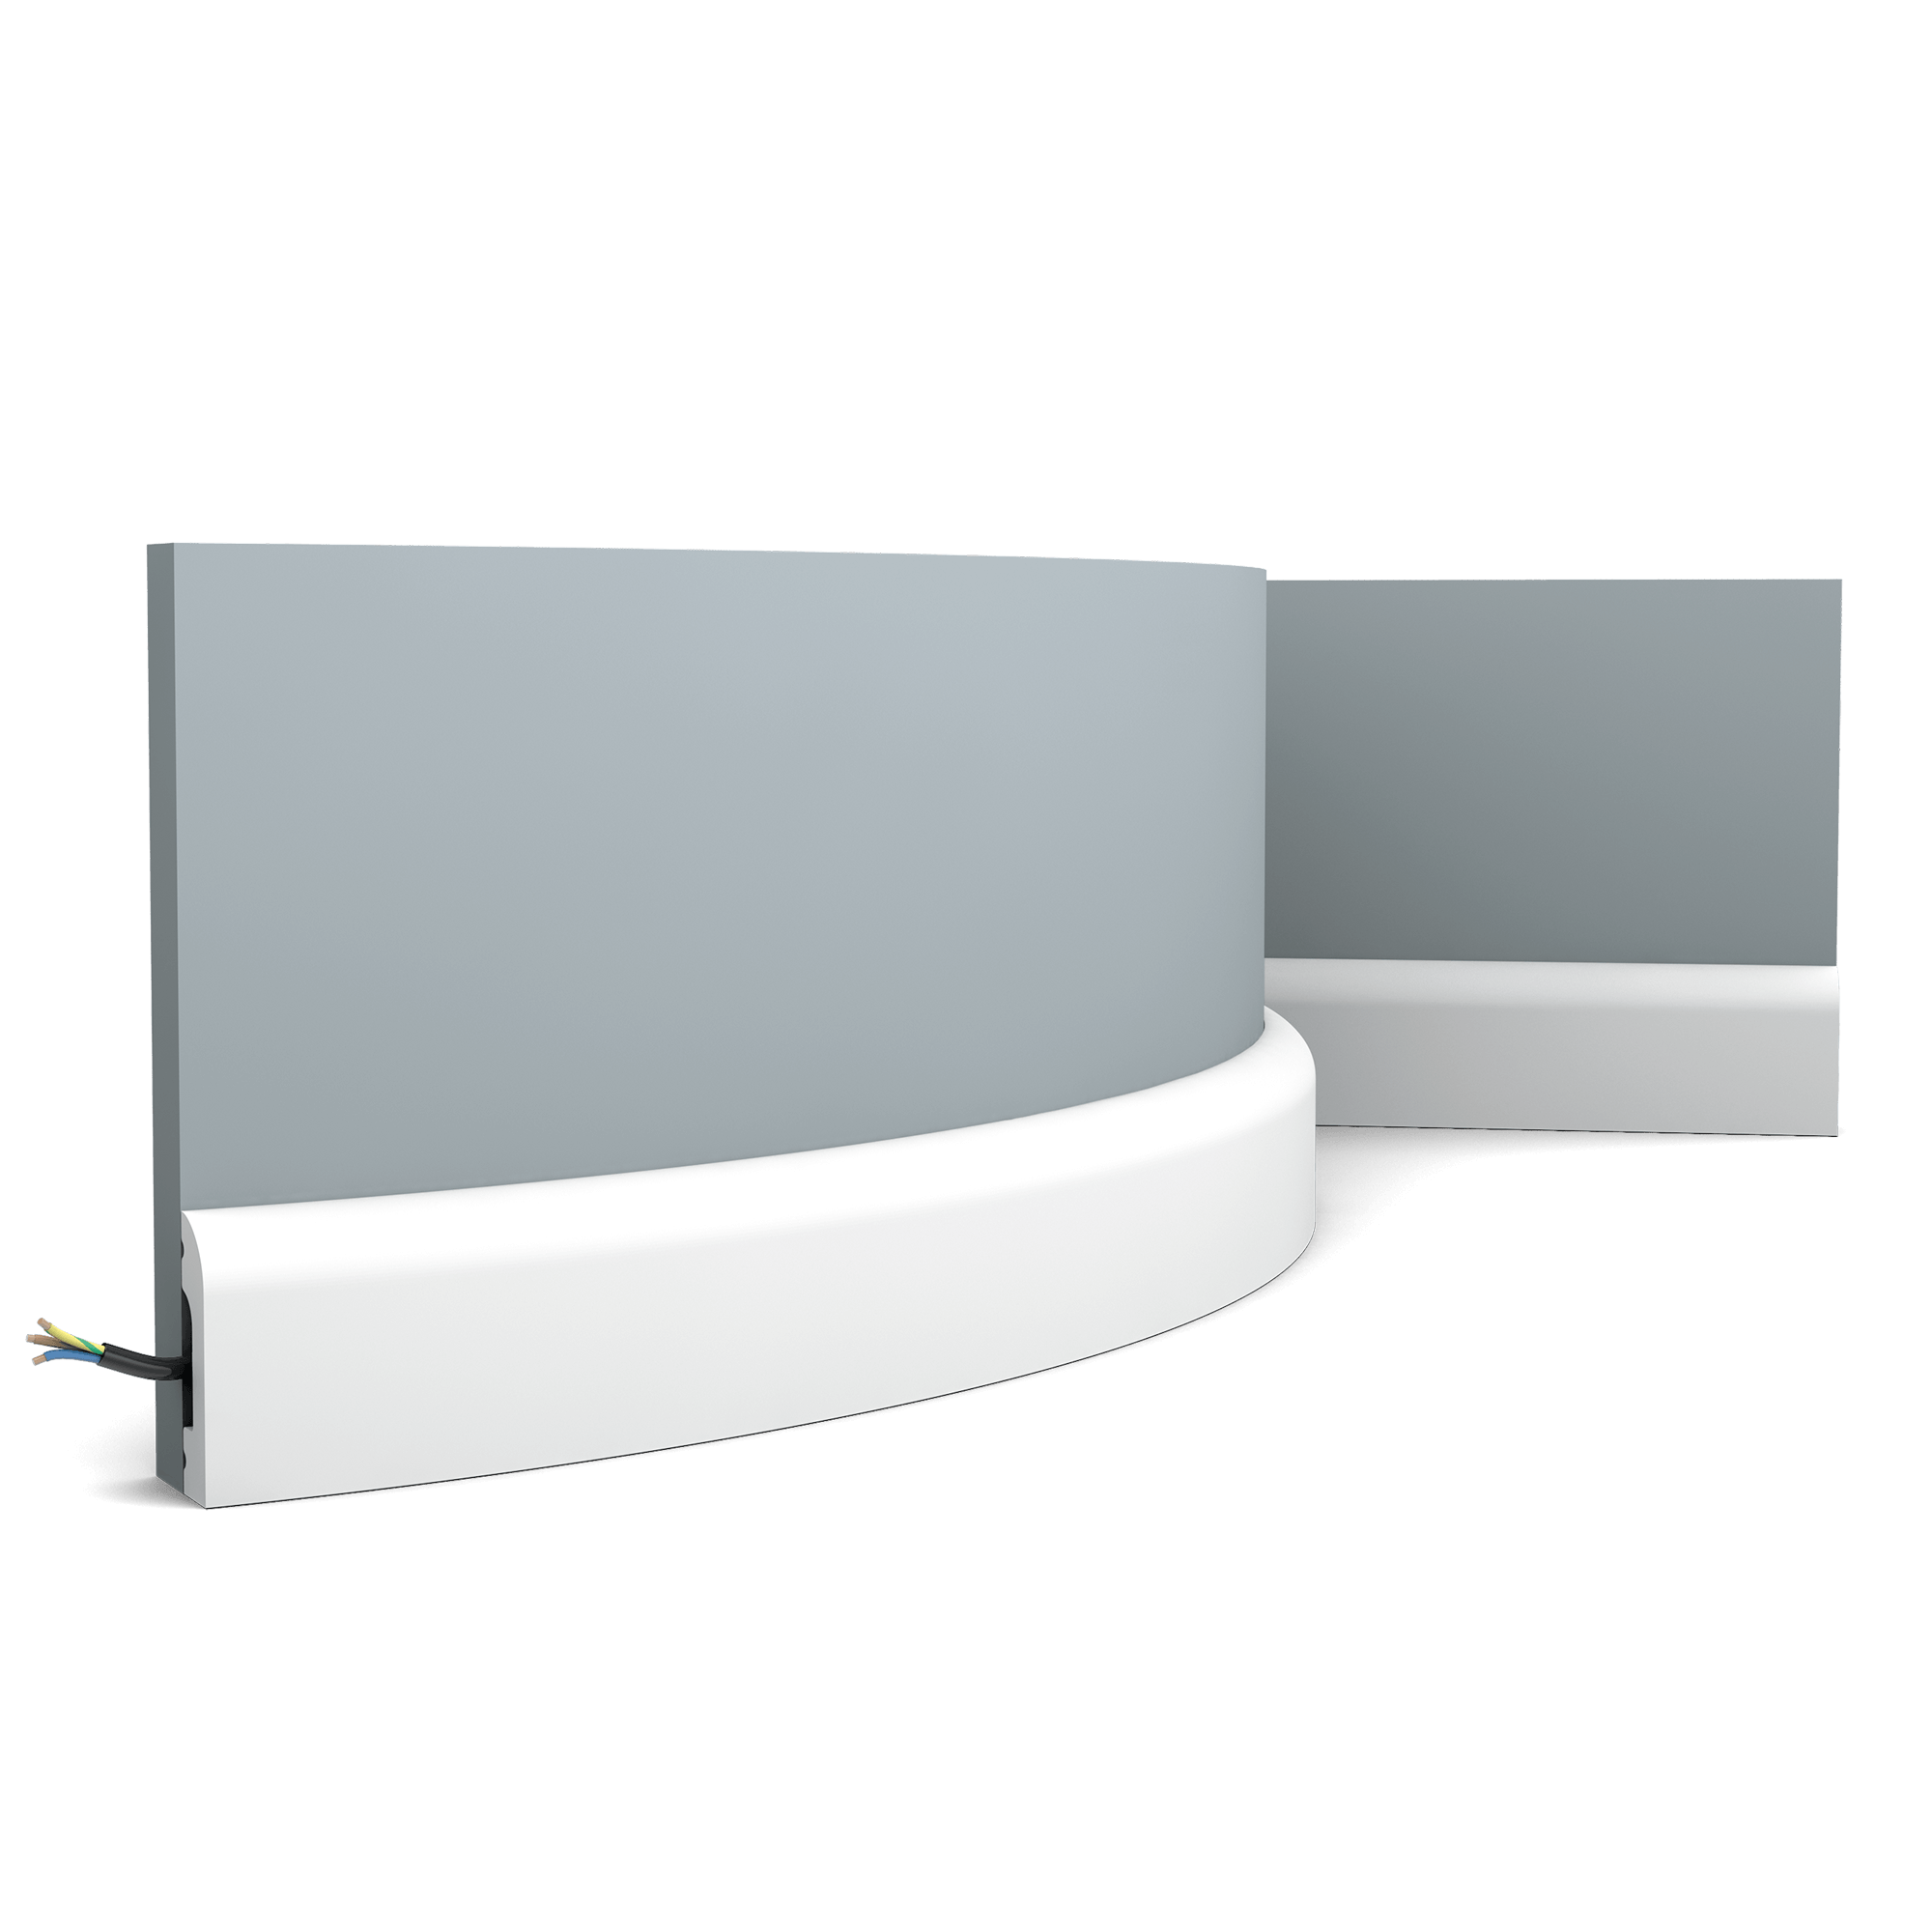 Flexible version of the SX182. This multifunctional skirting board with rounded top provides endless possibilities. Thanks to its Flex technology, curved walls and surfaces are no problem. Installation remark: It is necessary to screw this profile on the wall. Flex Radius: R min = 35 cm, R* min = 100 cm